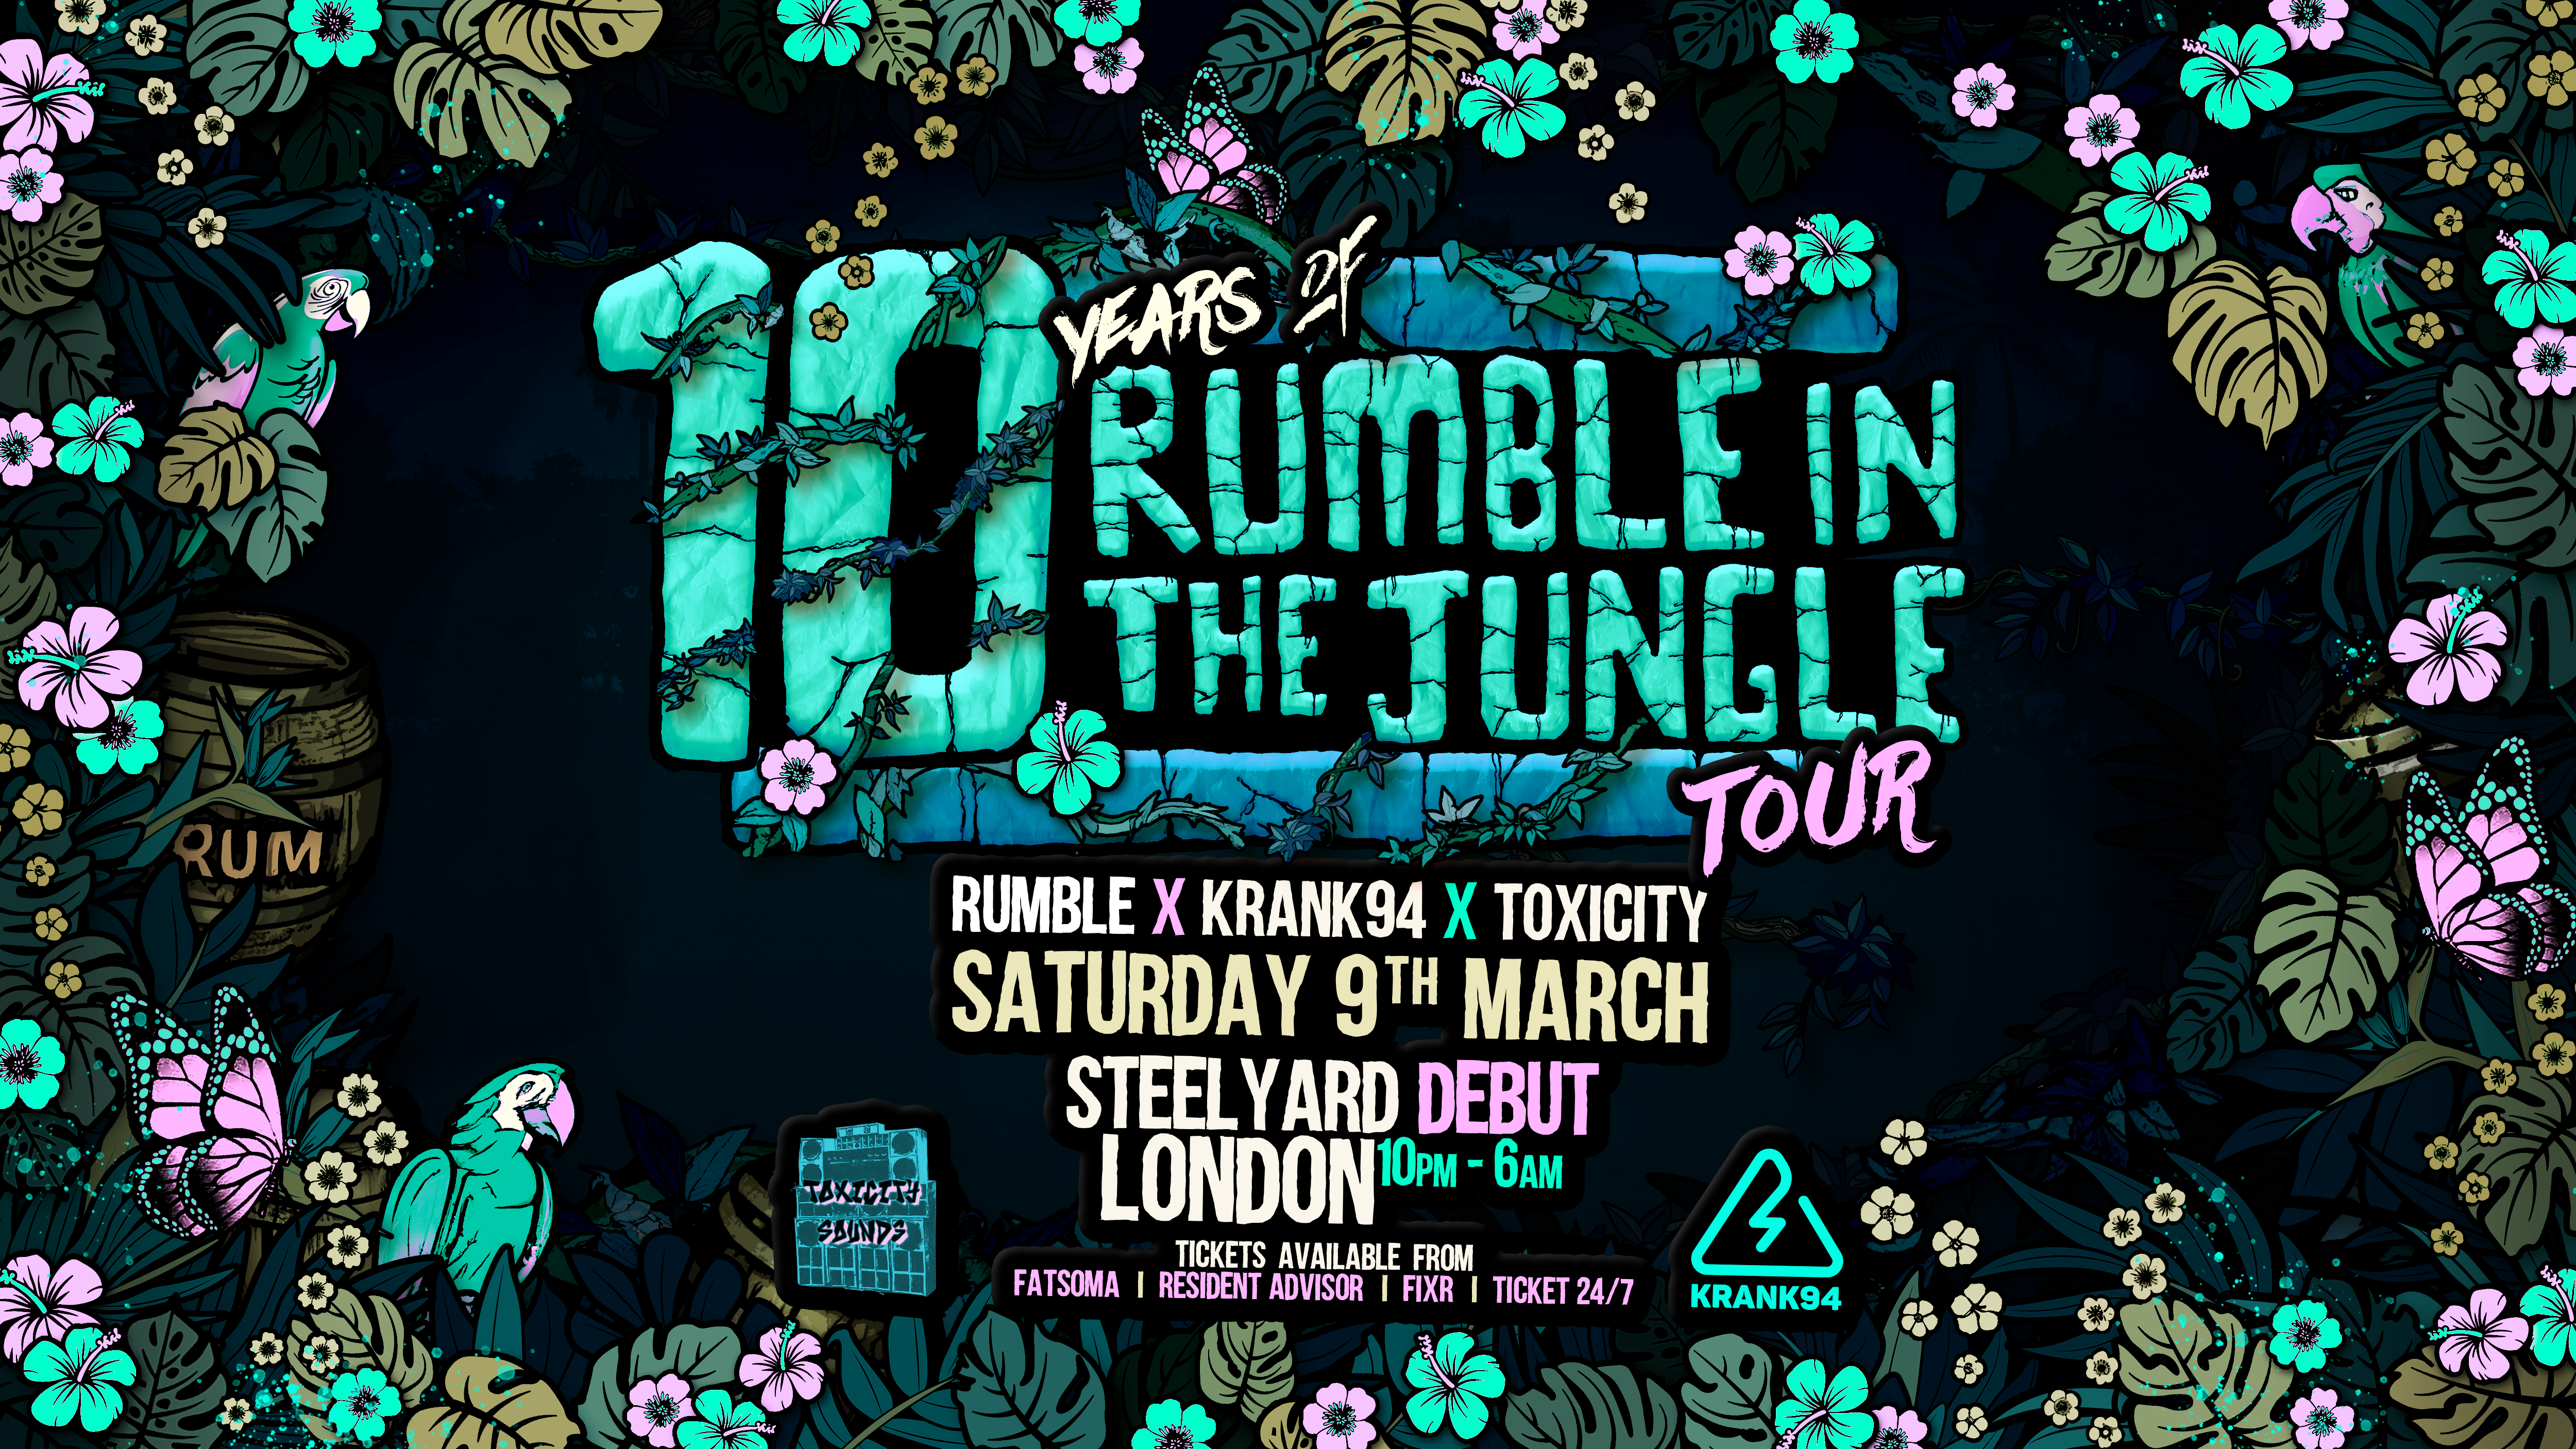 10 YEARS OF RUMBLE - LONDON - フライヤー表